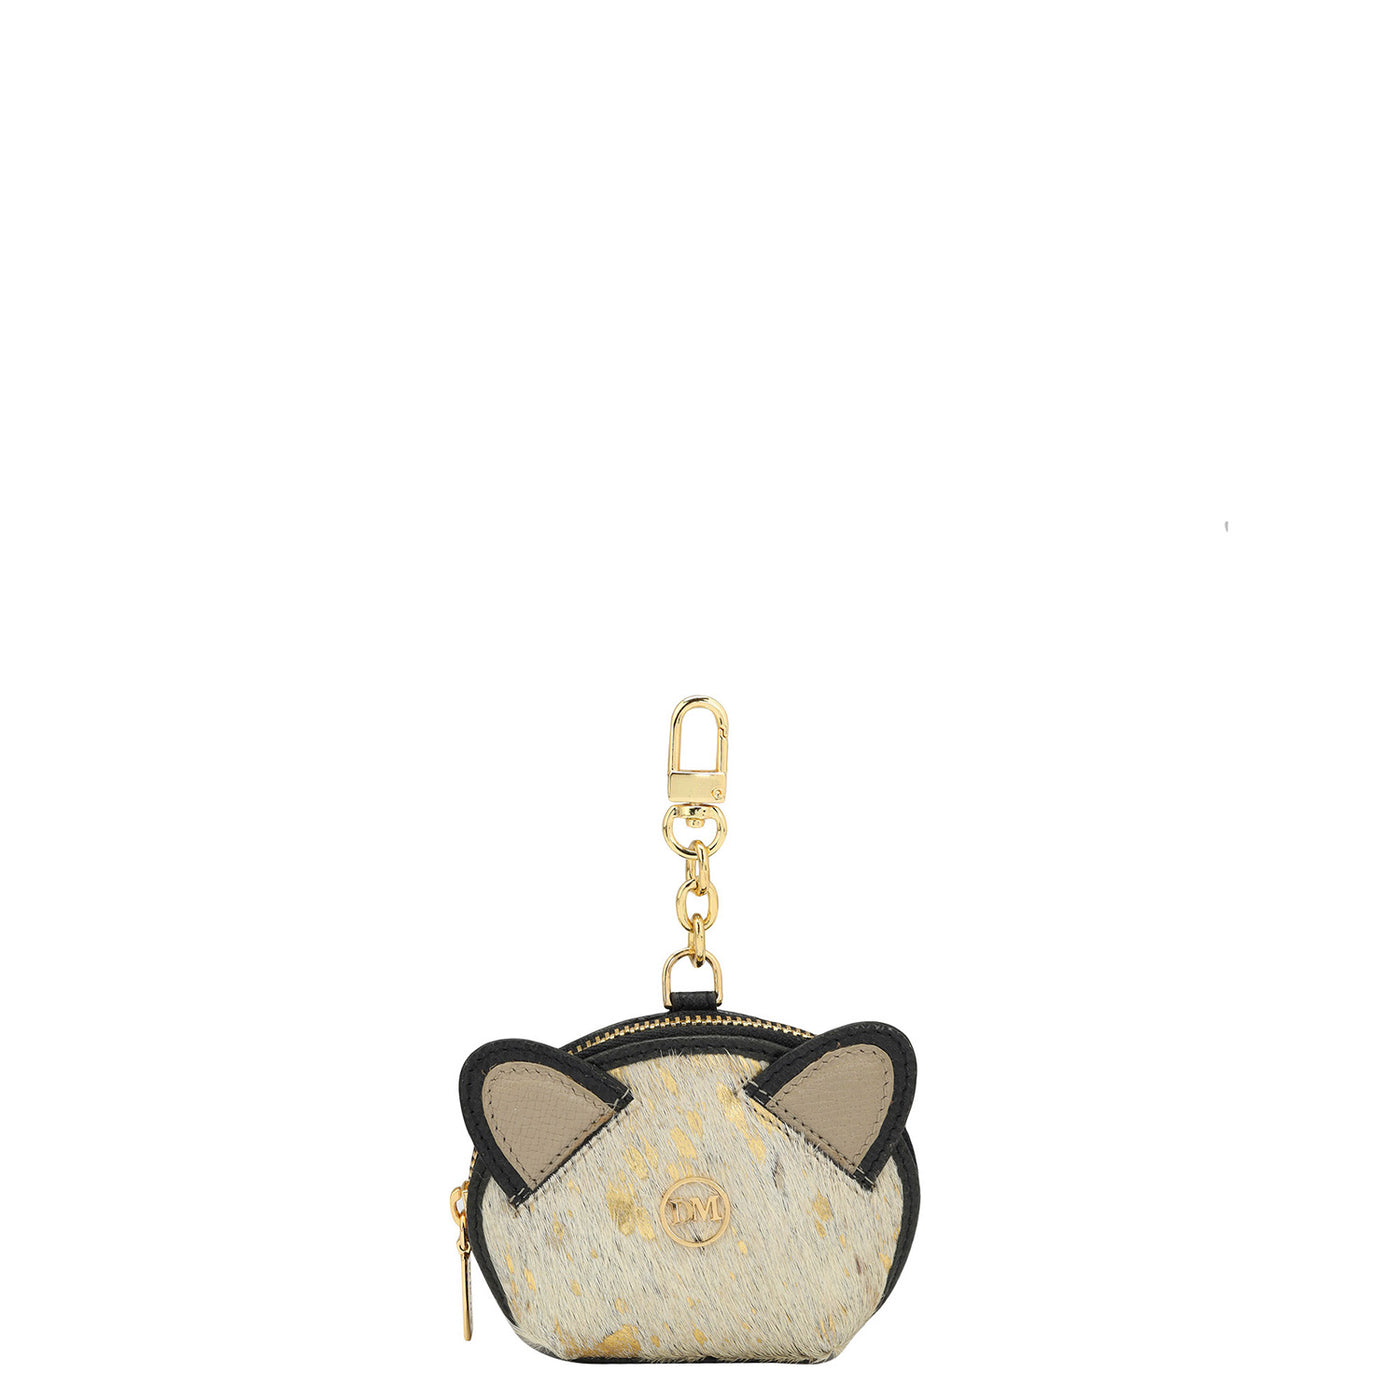 Fur Franzy Leather Bag Hanging - Off White & Gold